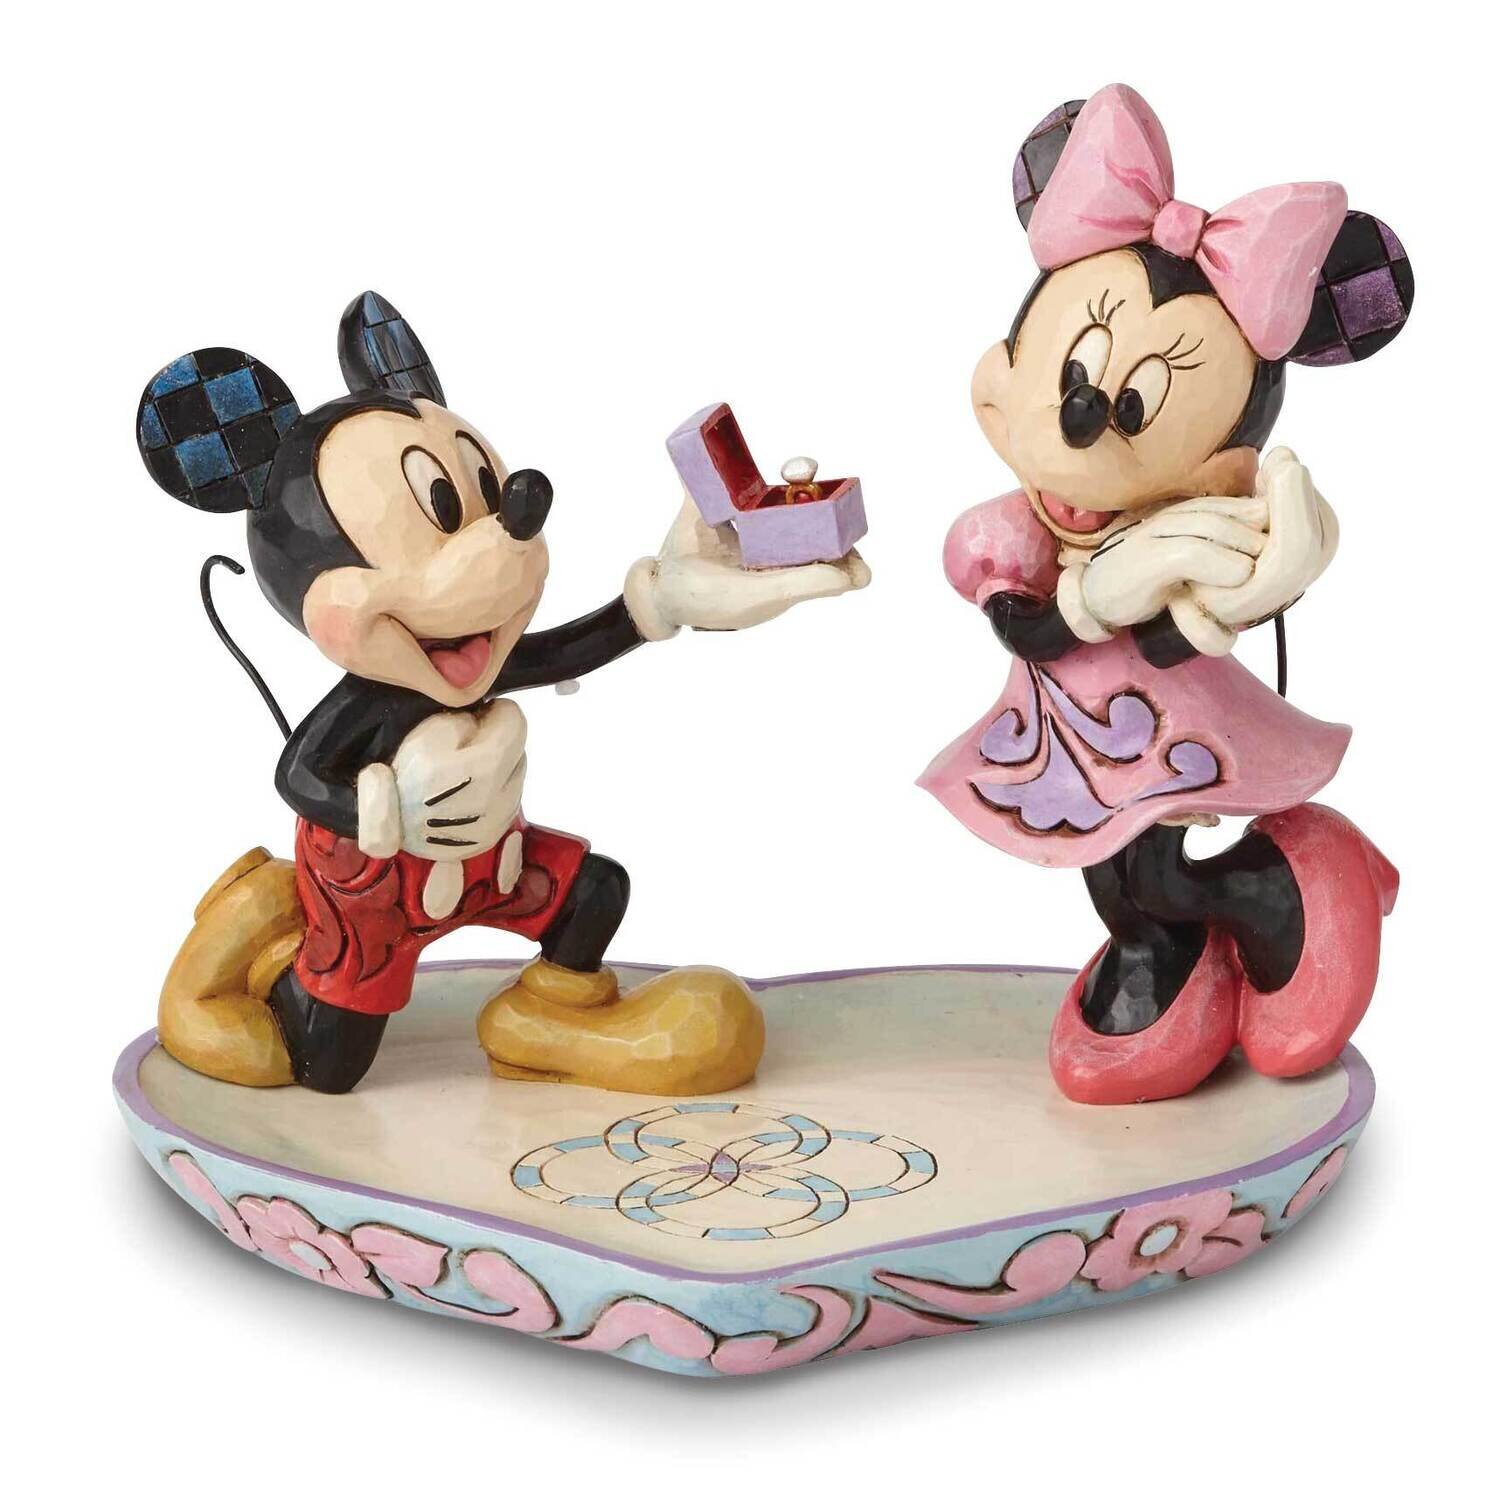 Disney Traditions Mickey and Minnie with Ring Box Figurine GM19446